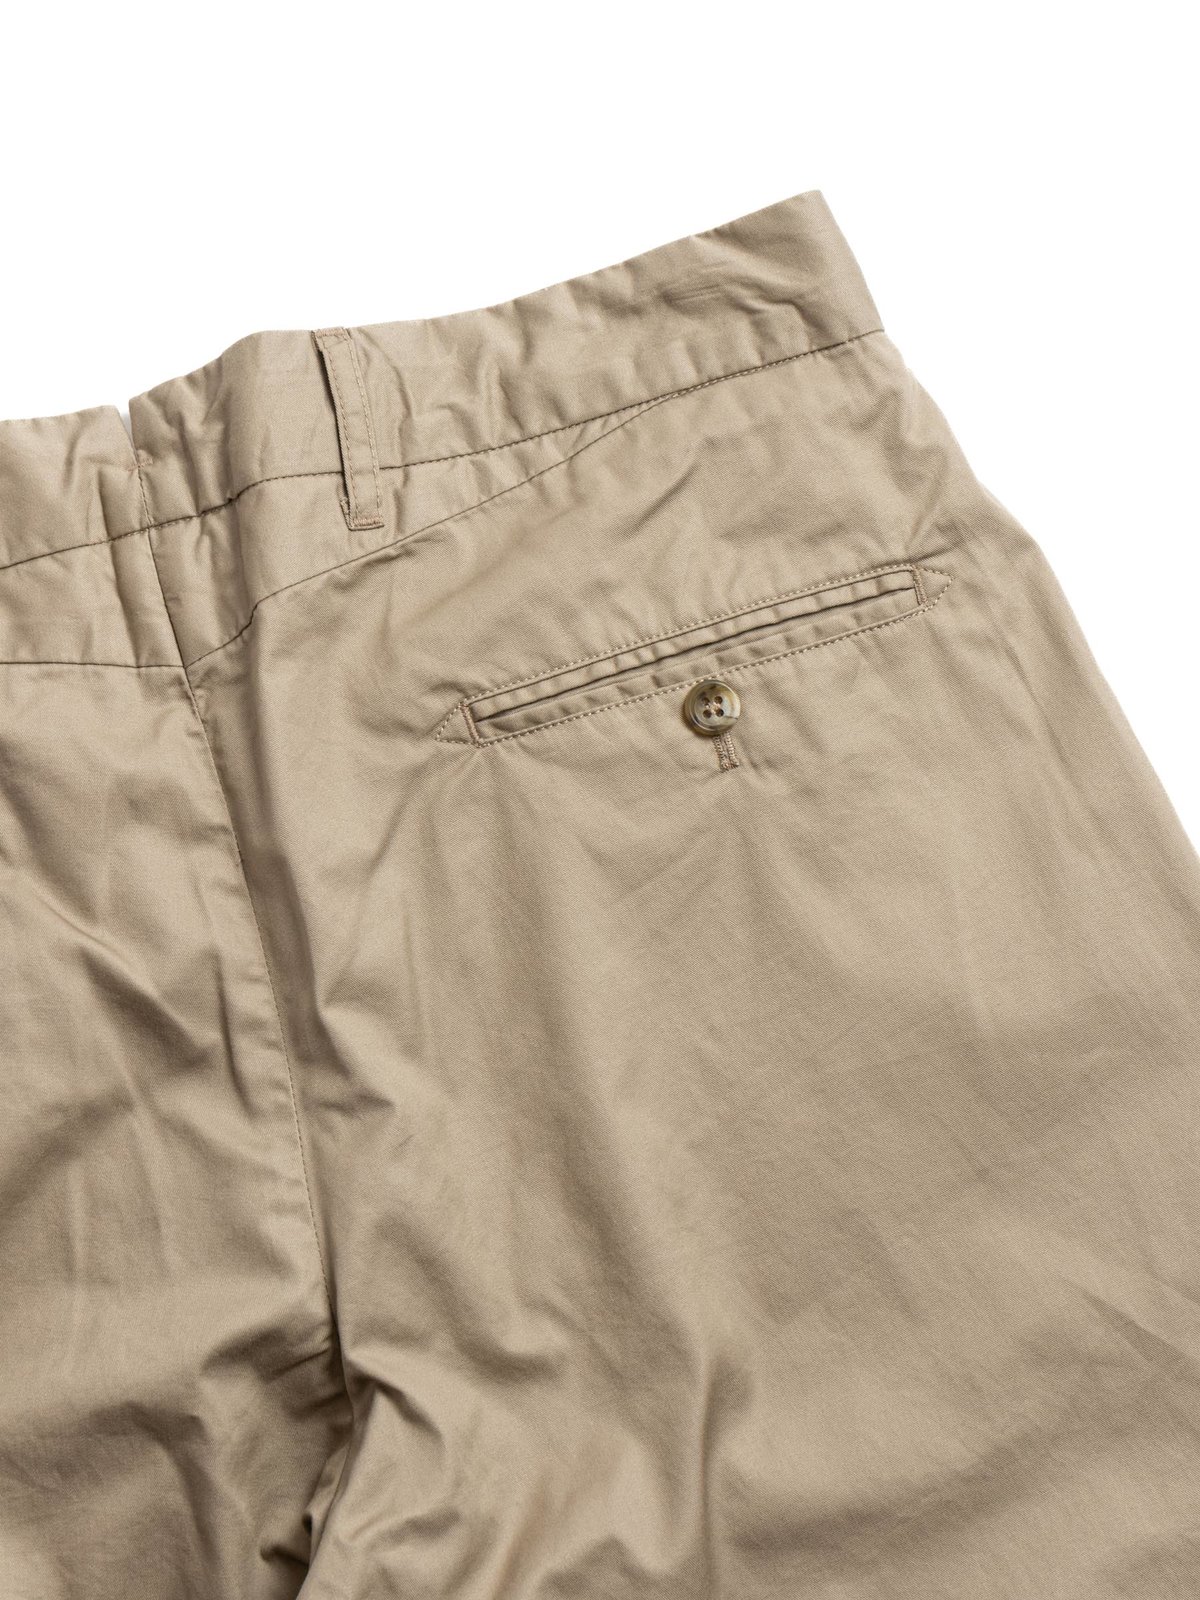 ANDOVER PANT KHAKI HIGH COUNT TWILL - Image 5